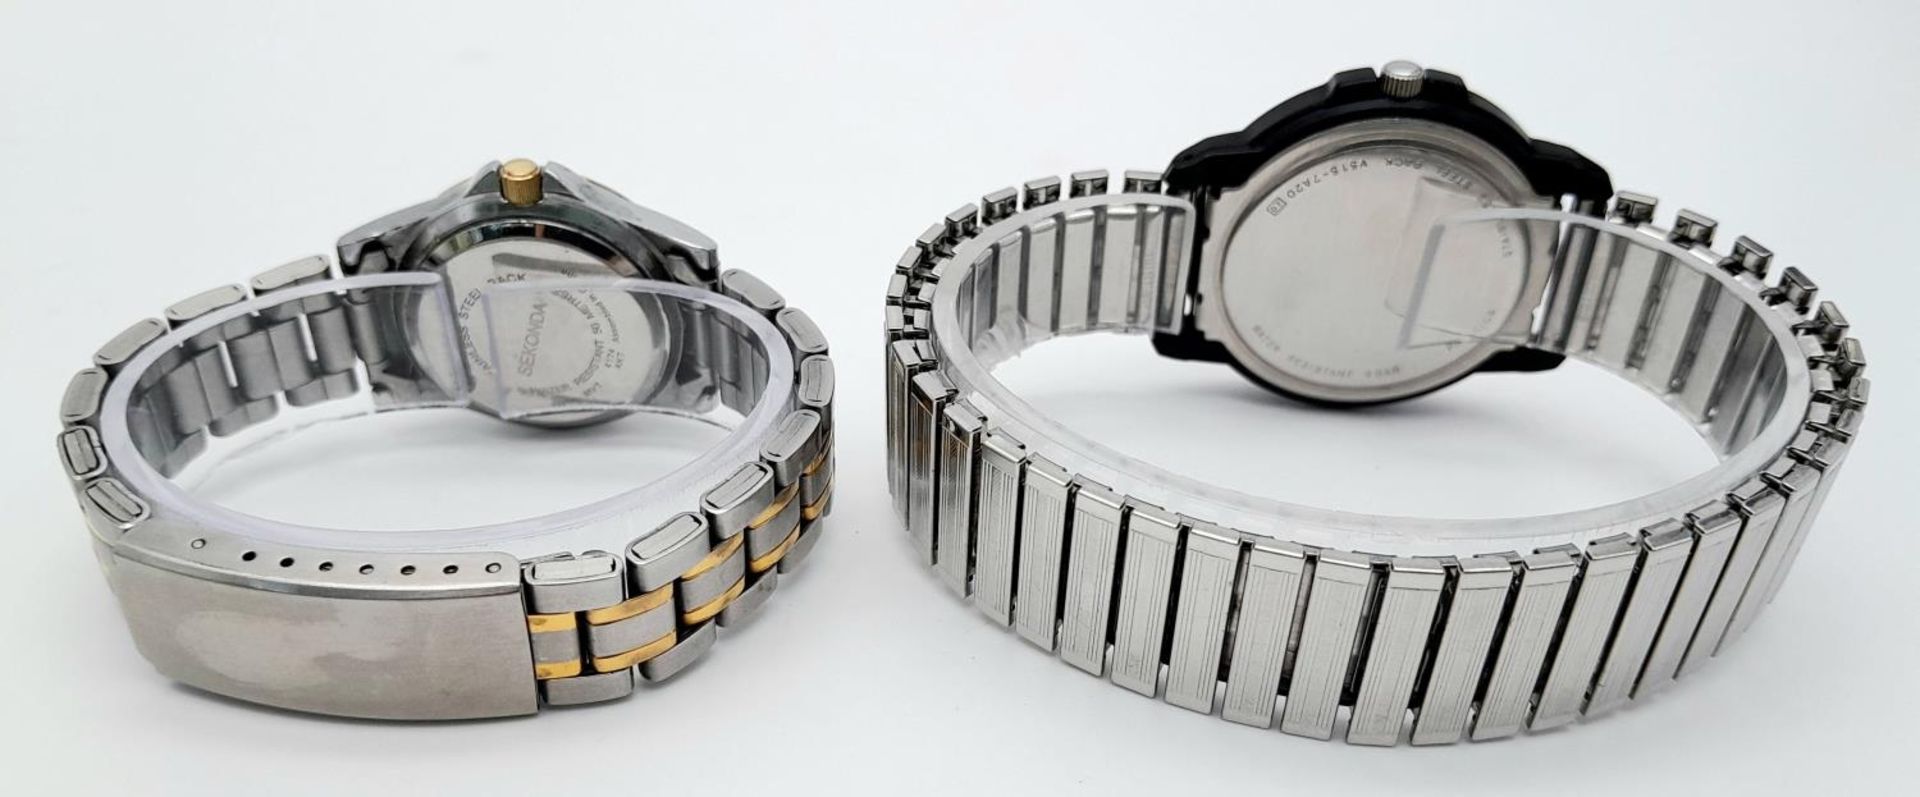 A Sekonda and Lorus Sports Quartz Watch. 37 and 28mm cases. Both in working order. - Image 4 of 6